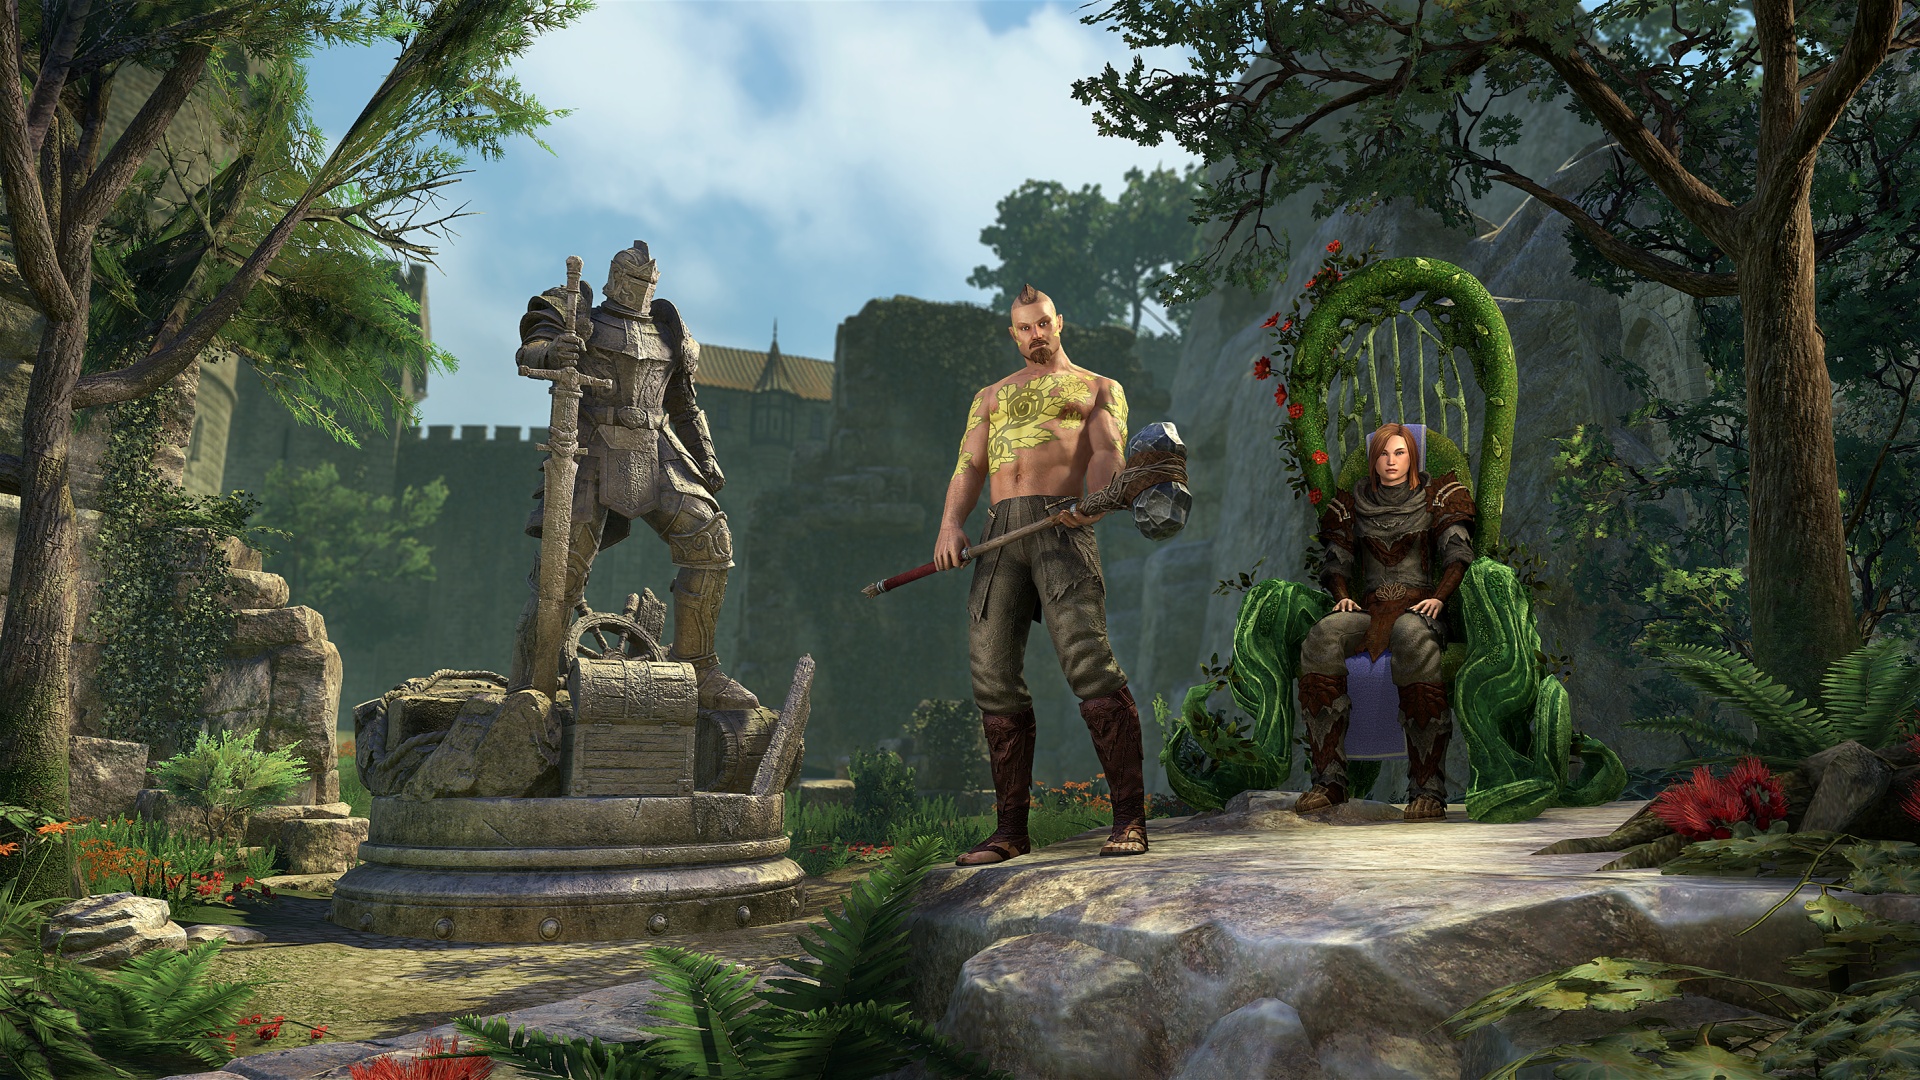 Work Together to Unlock Special Rewards During Elder Scrolls Online’s Heroes of High Isle Event